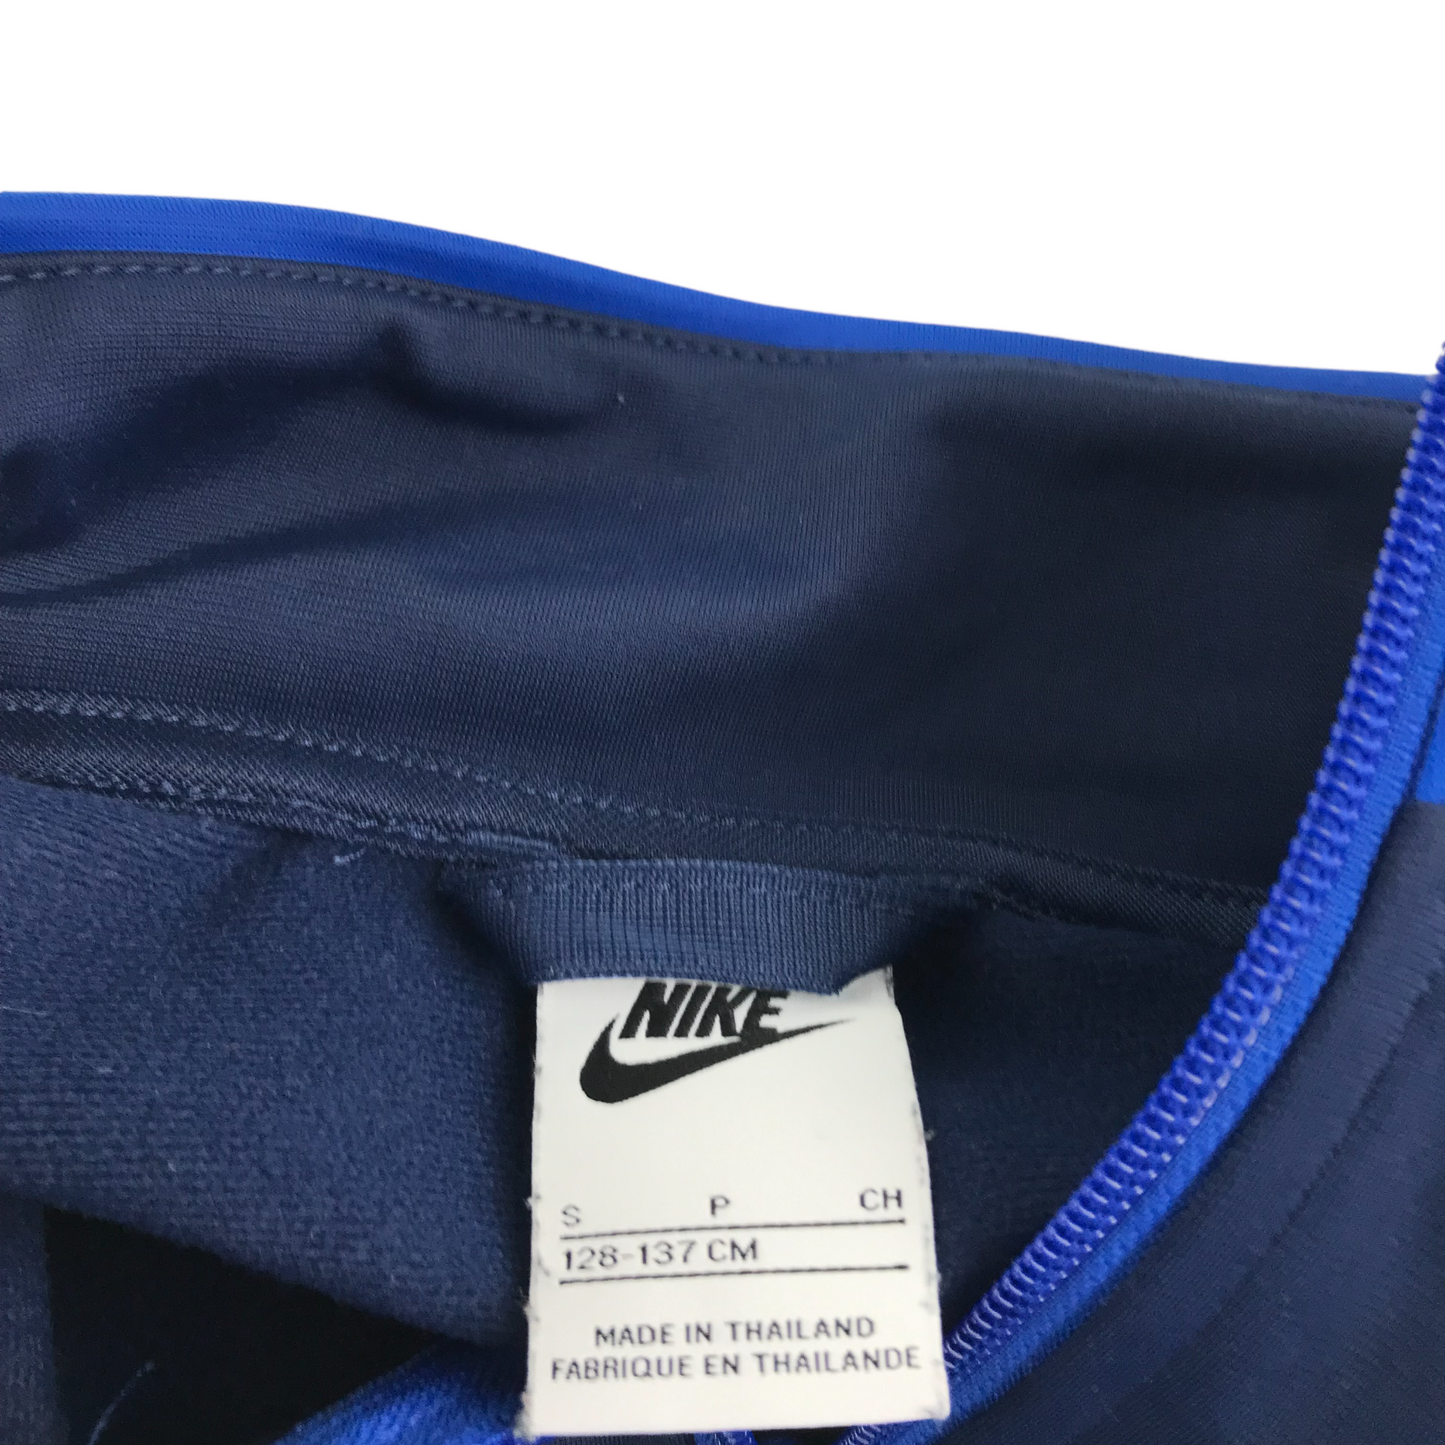 Nike Sweater Age 8 Navy and Blue Panelled Full Zipper